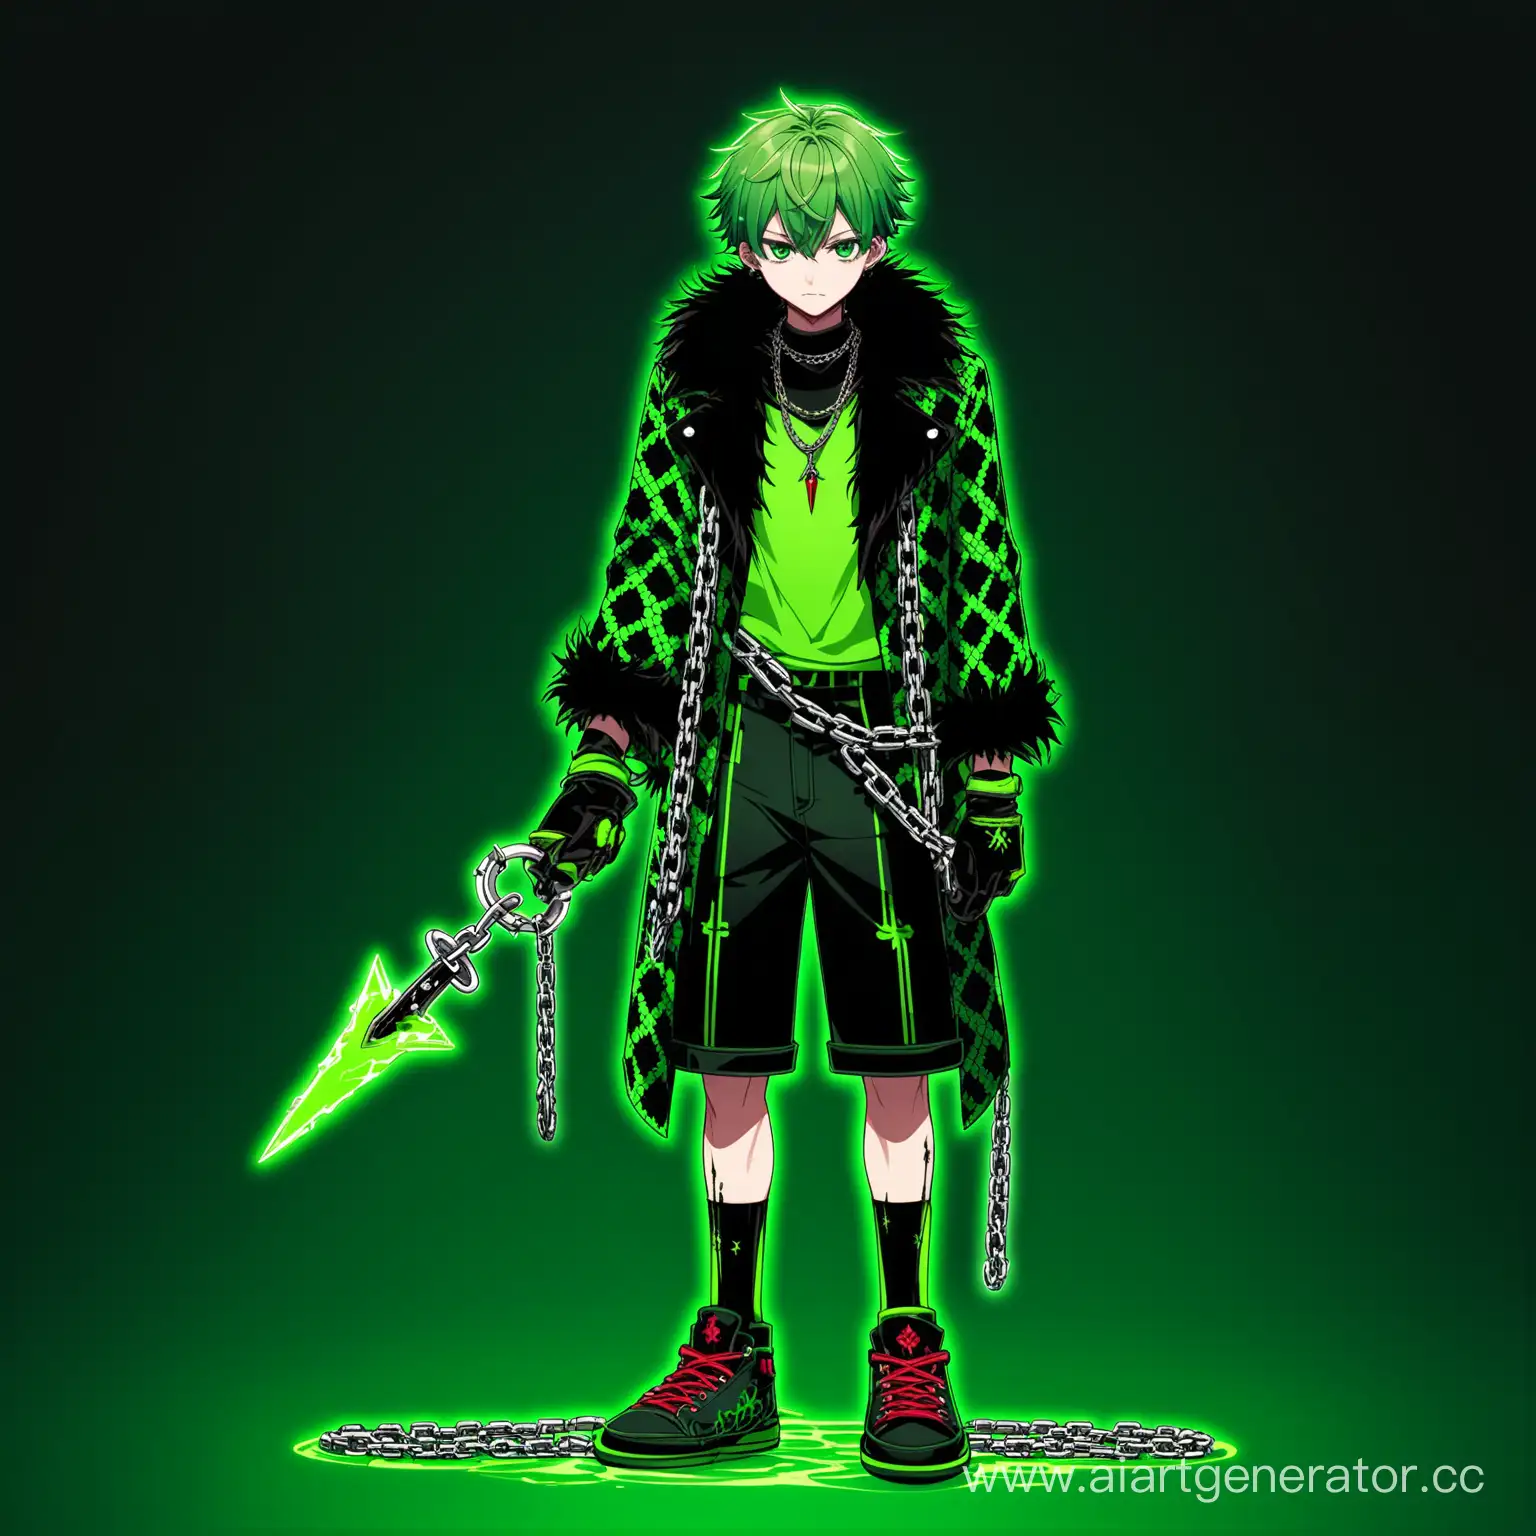 Mysterious-Man-with-Unique-Style-in-Neon-Green-Setting